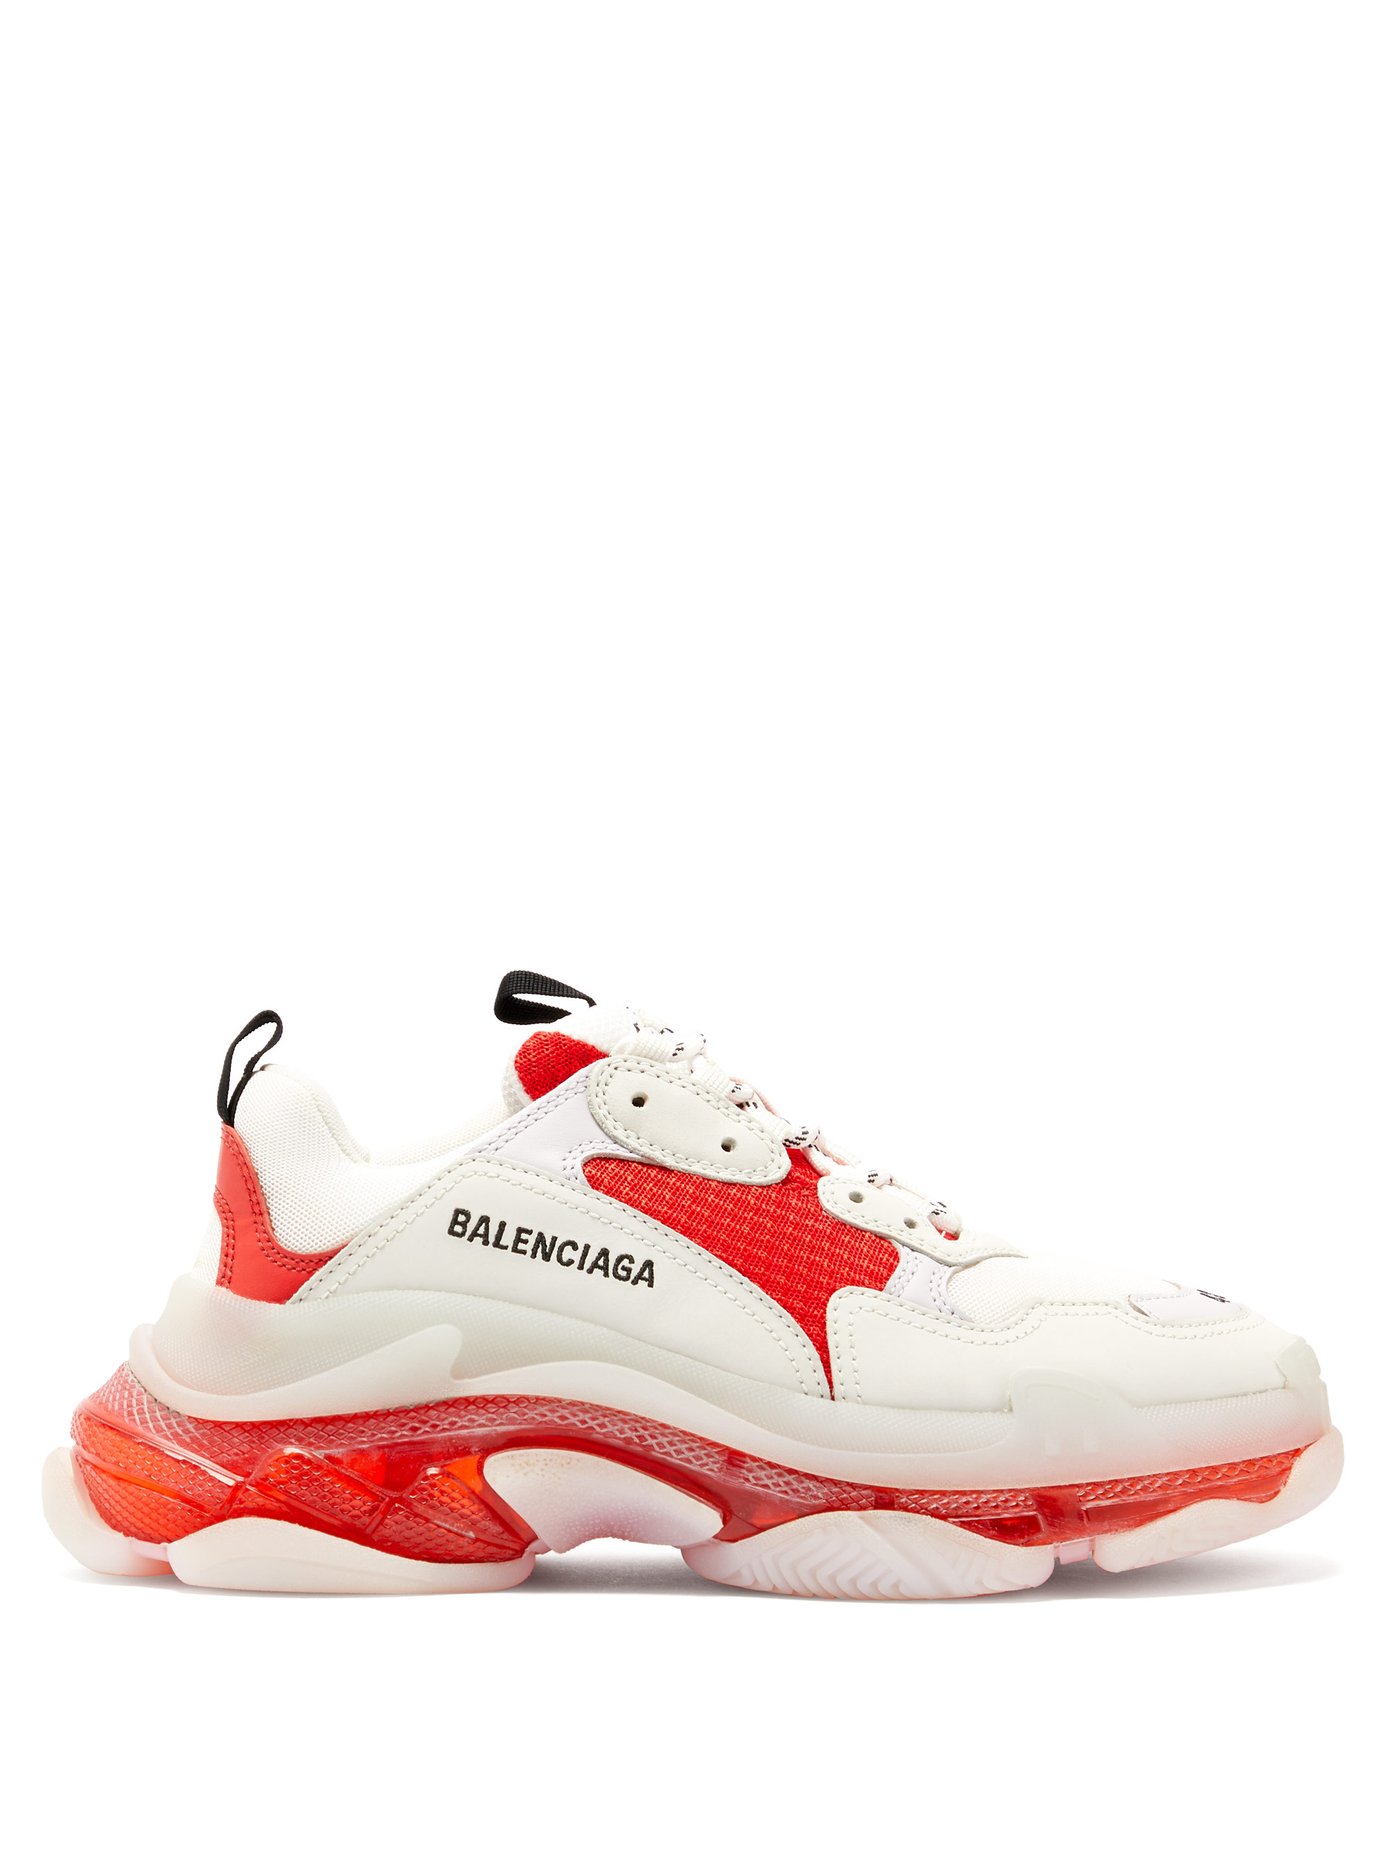 How to get new Balenciaga Triple S Trainers White Black